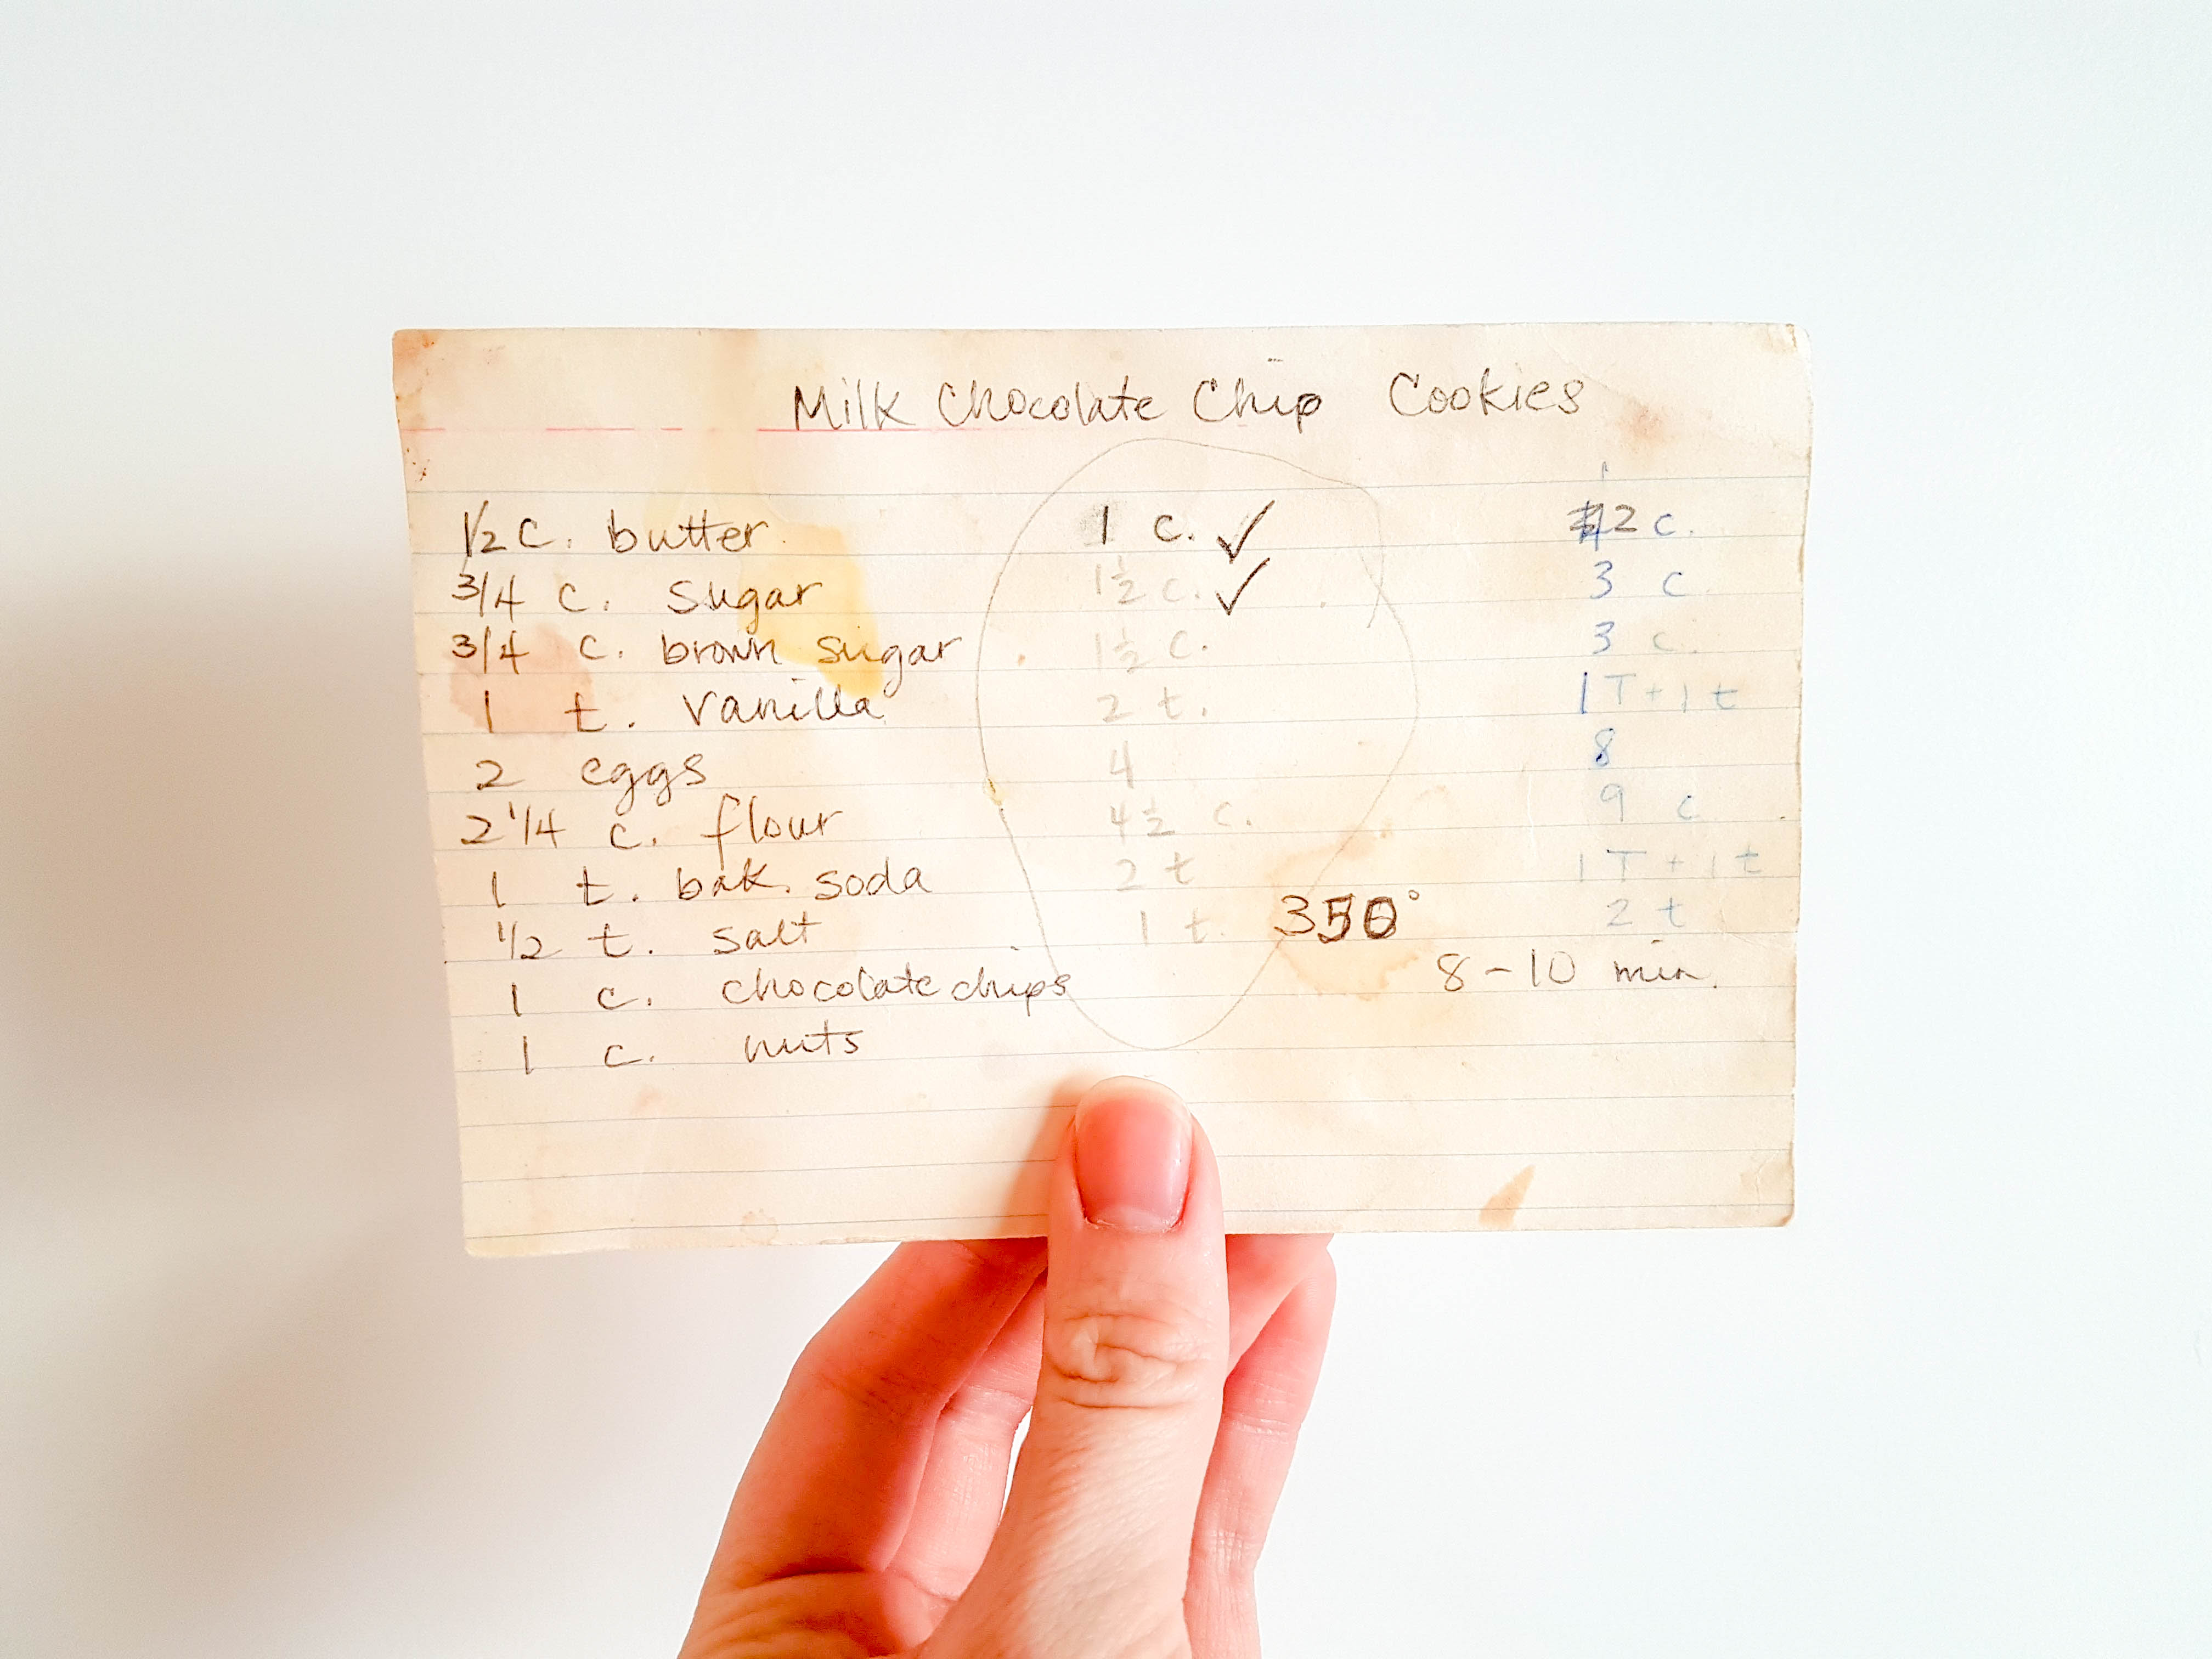 Recipe card for milk chocolate chip cookies.